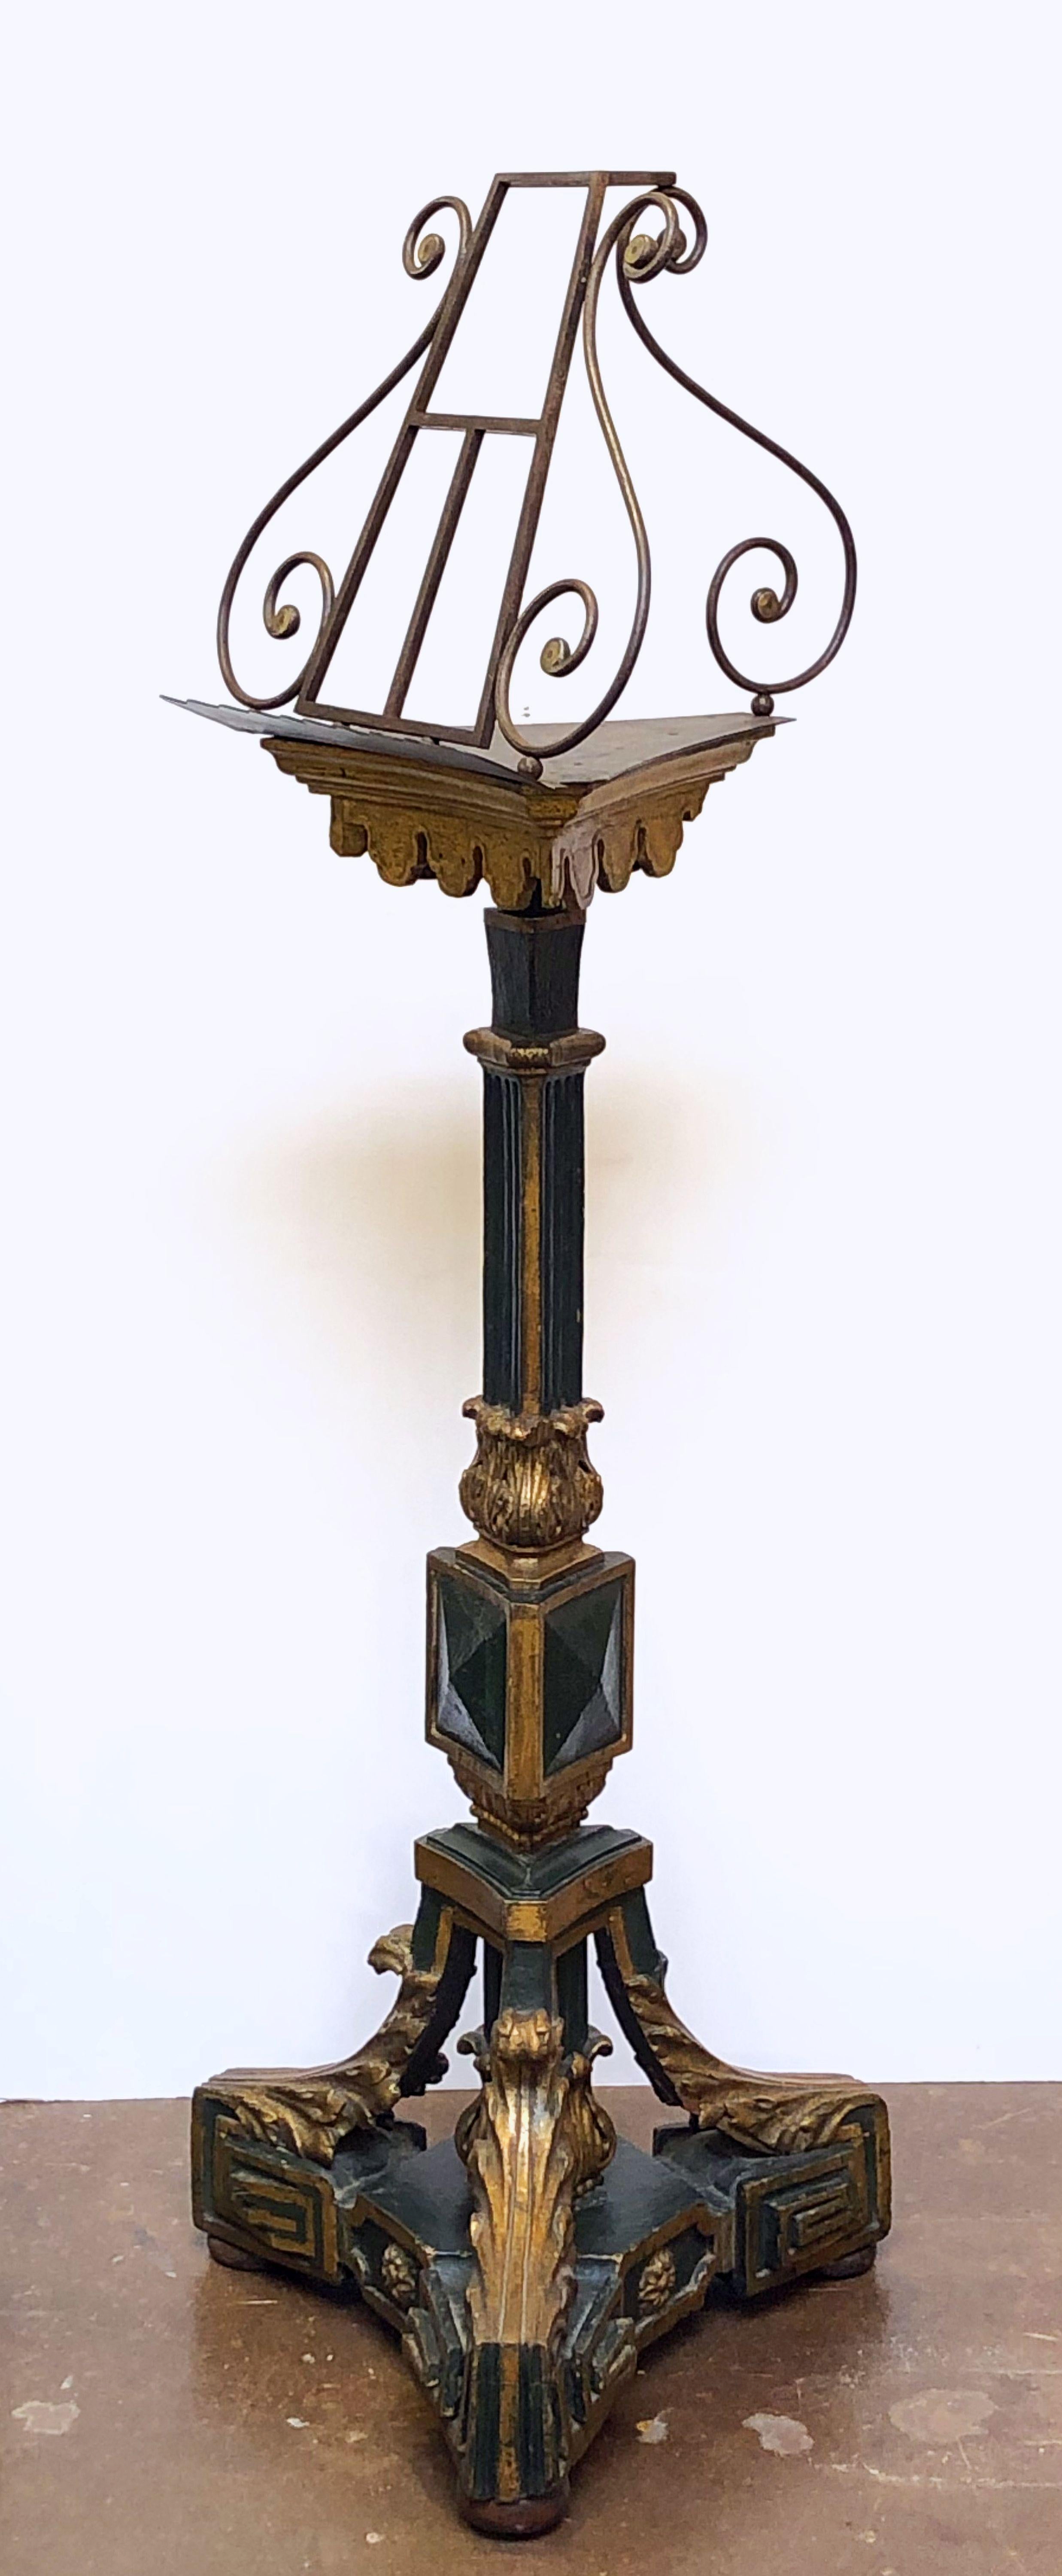 A fine English standing lectern or music stand, featuring a lyre-shaped scroll-work top attached to a pedestal column of painted carved wood with gilt accents and decorative Greek Key and acanthus leaf flourishes, on a tripod base. Measures: H 69 ½.